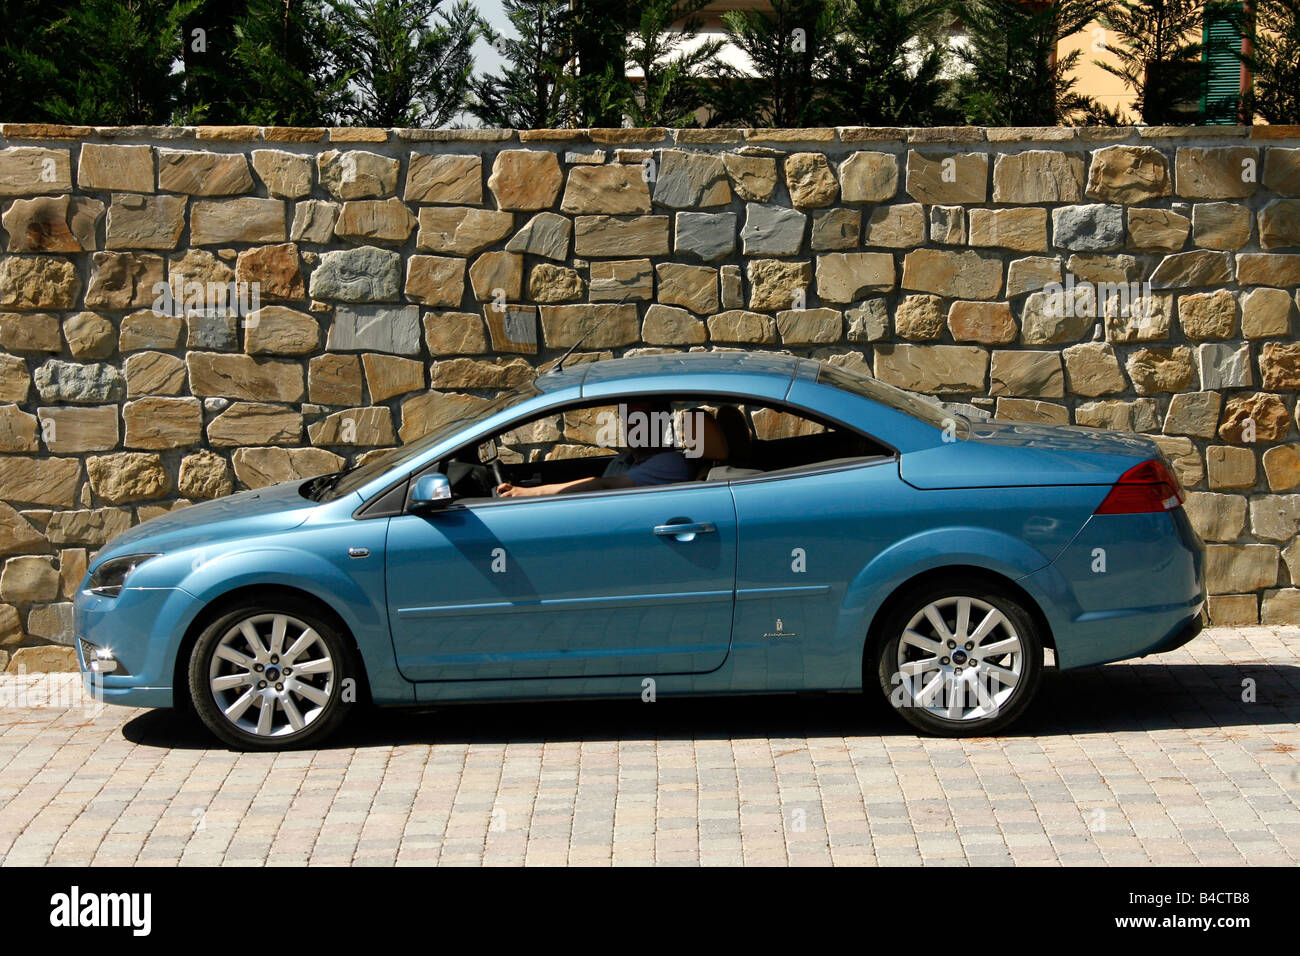 Ford Focus Coupe-Convertible 2.0, model year 2006-, standing, upholding, side view, closed top Stock Photo